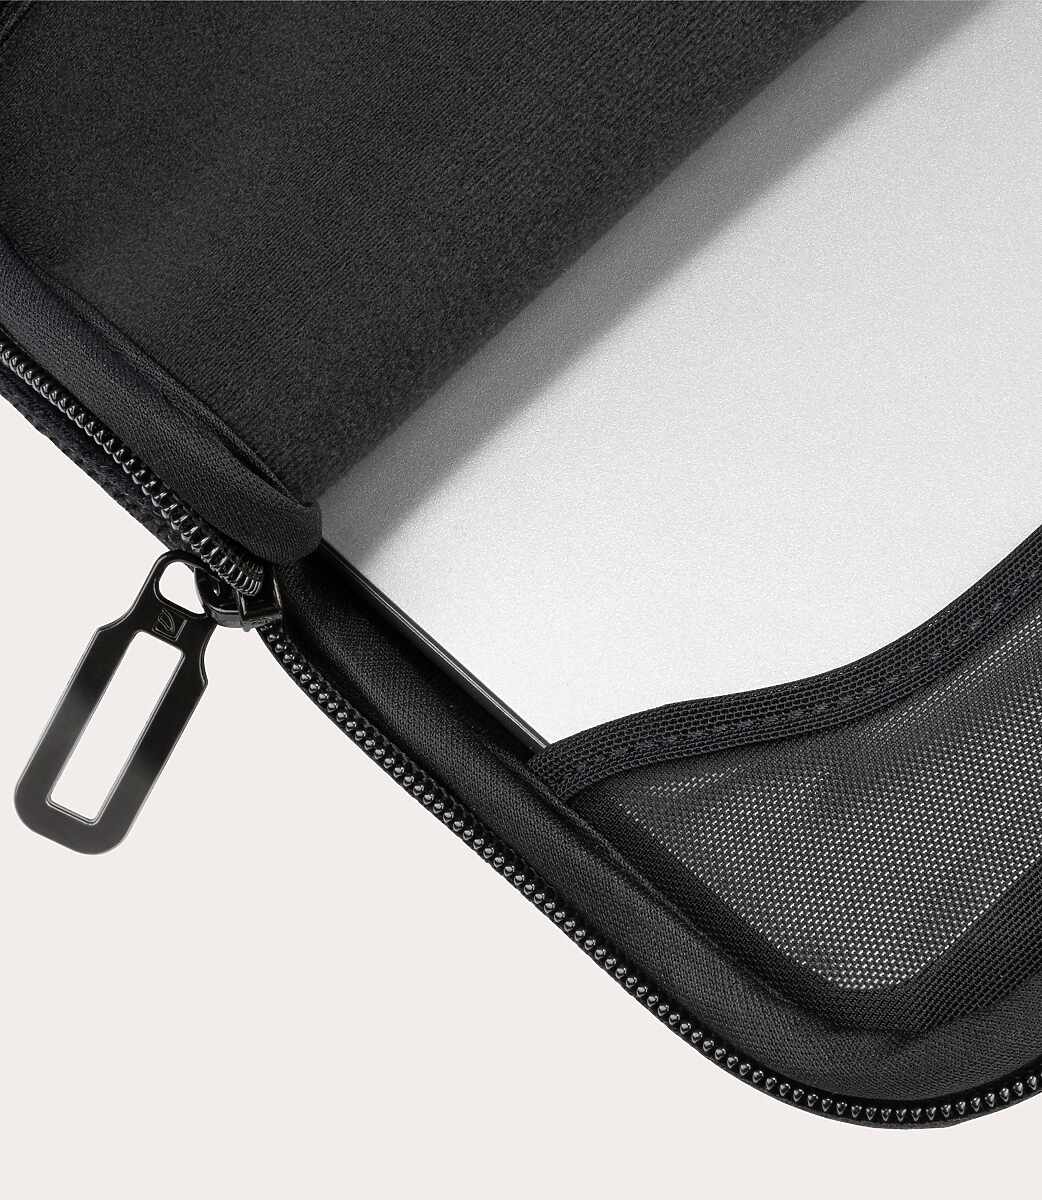 Tucano Velluto Sleeve for laptops up to 16in